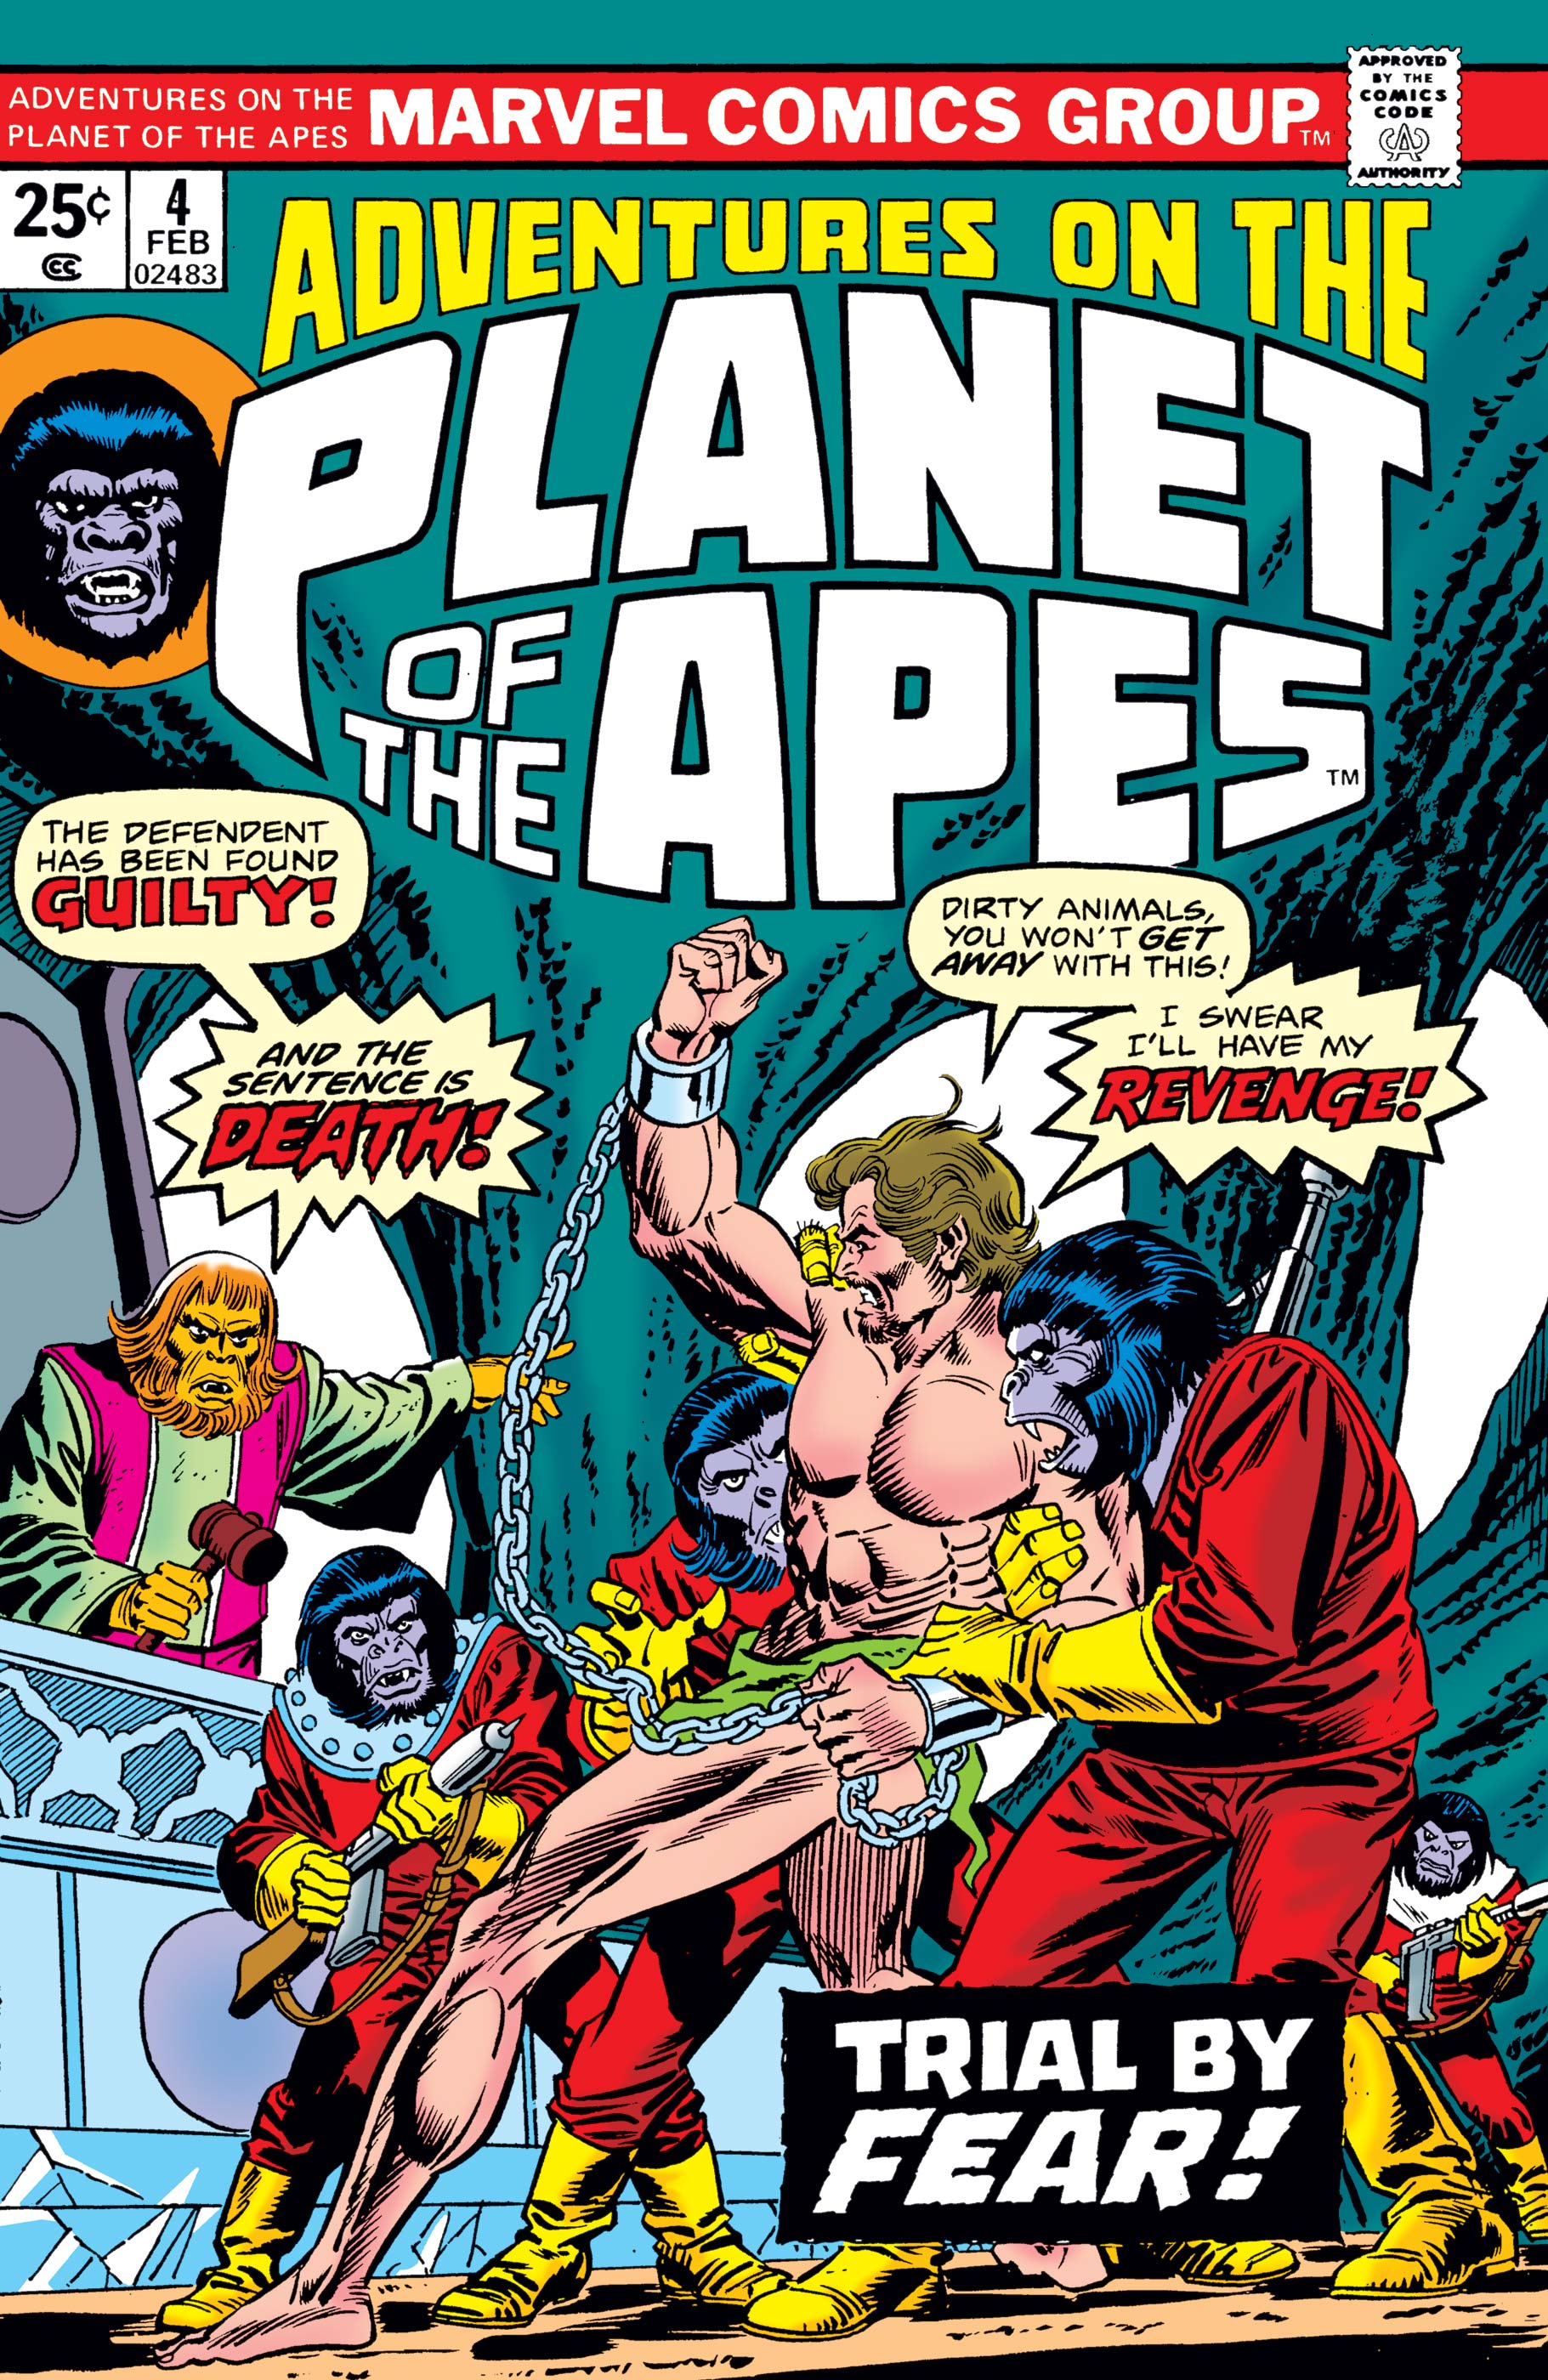 Adventures on the Planet of the Apes (1975) #4